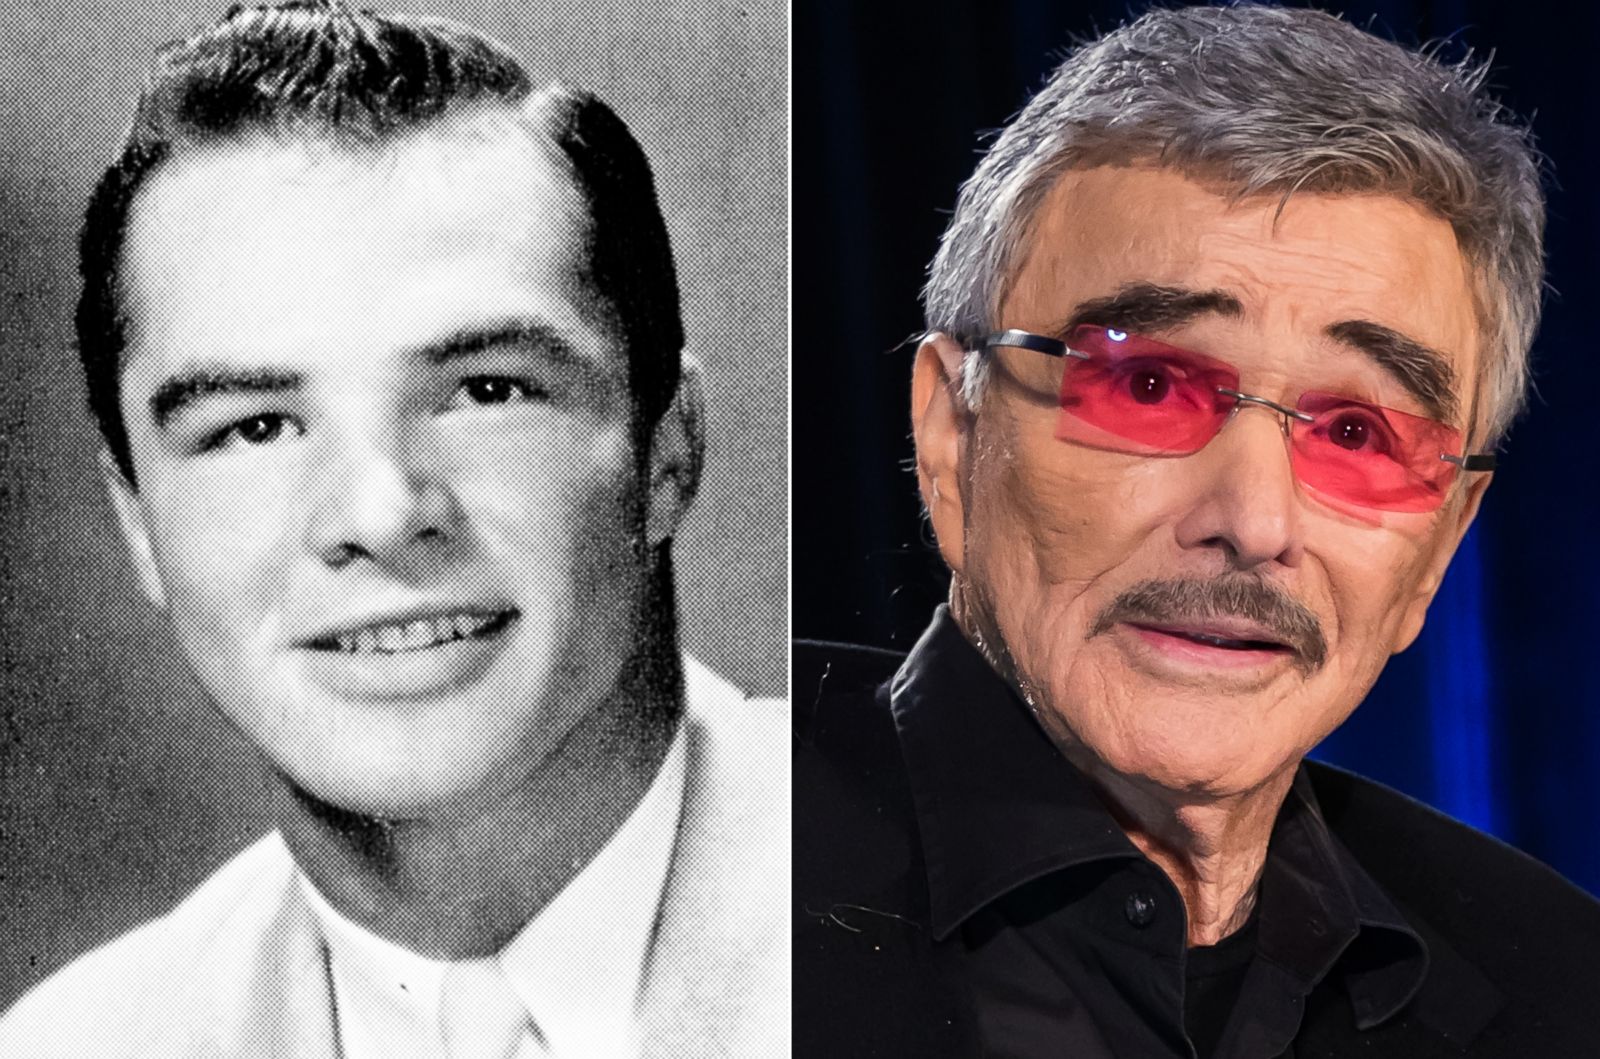 Burt Reynolds from Who is this future 'Queen of Pop'? 